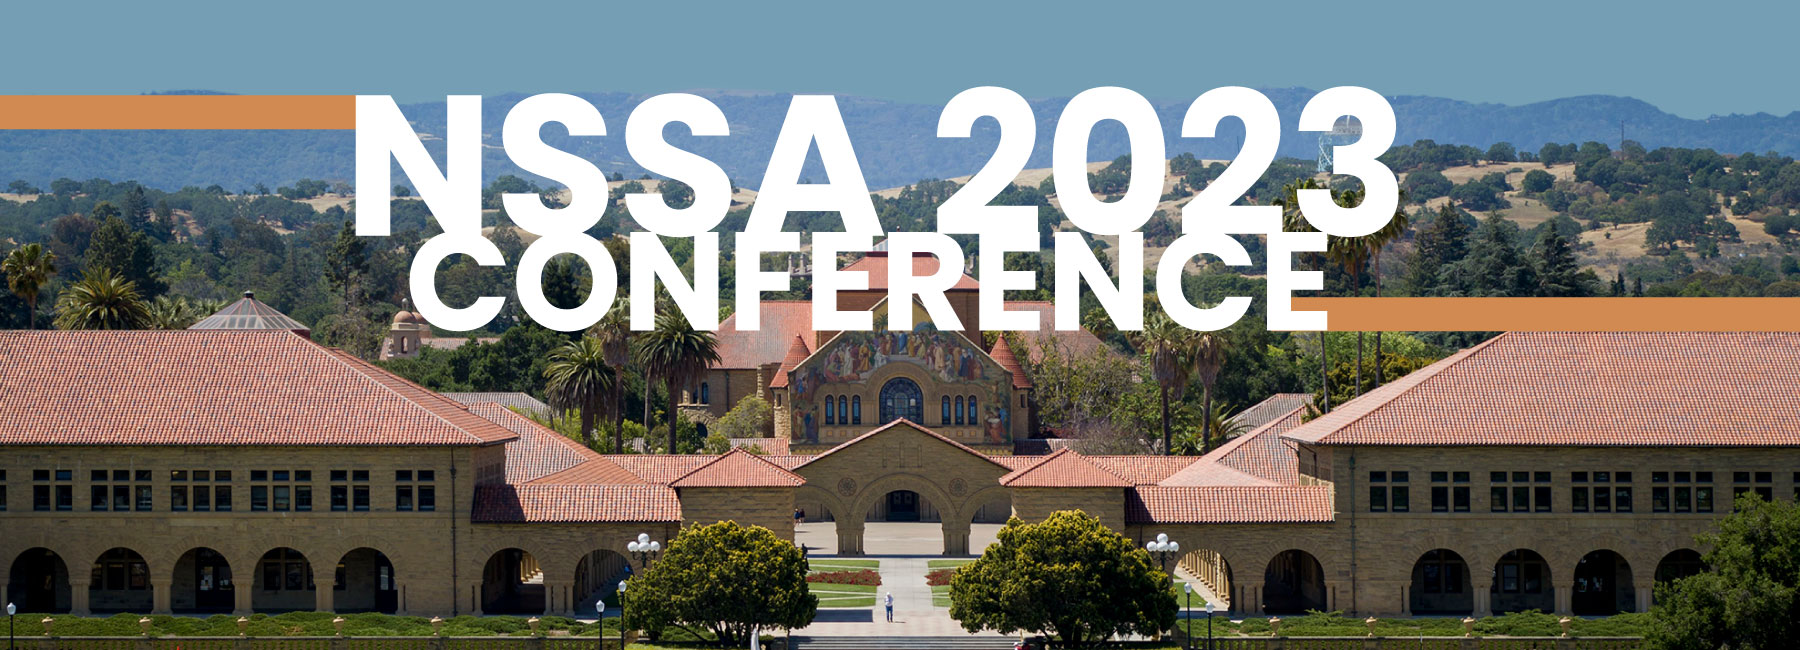 NSSA 2023 Conference